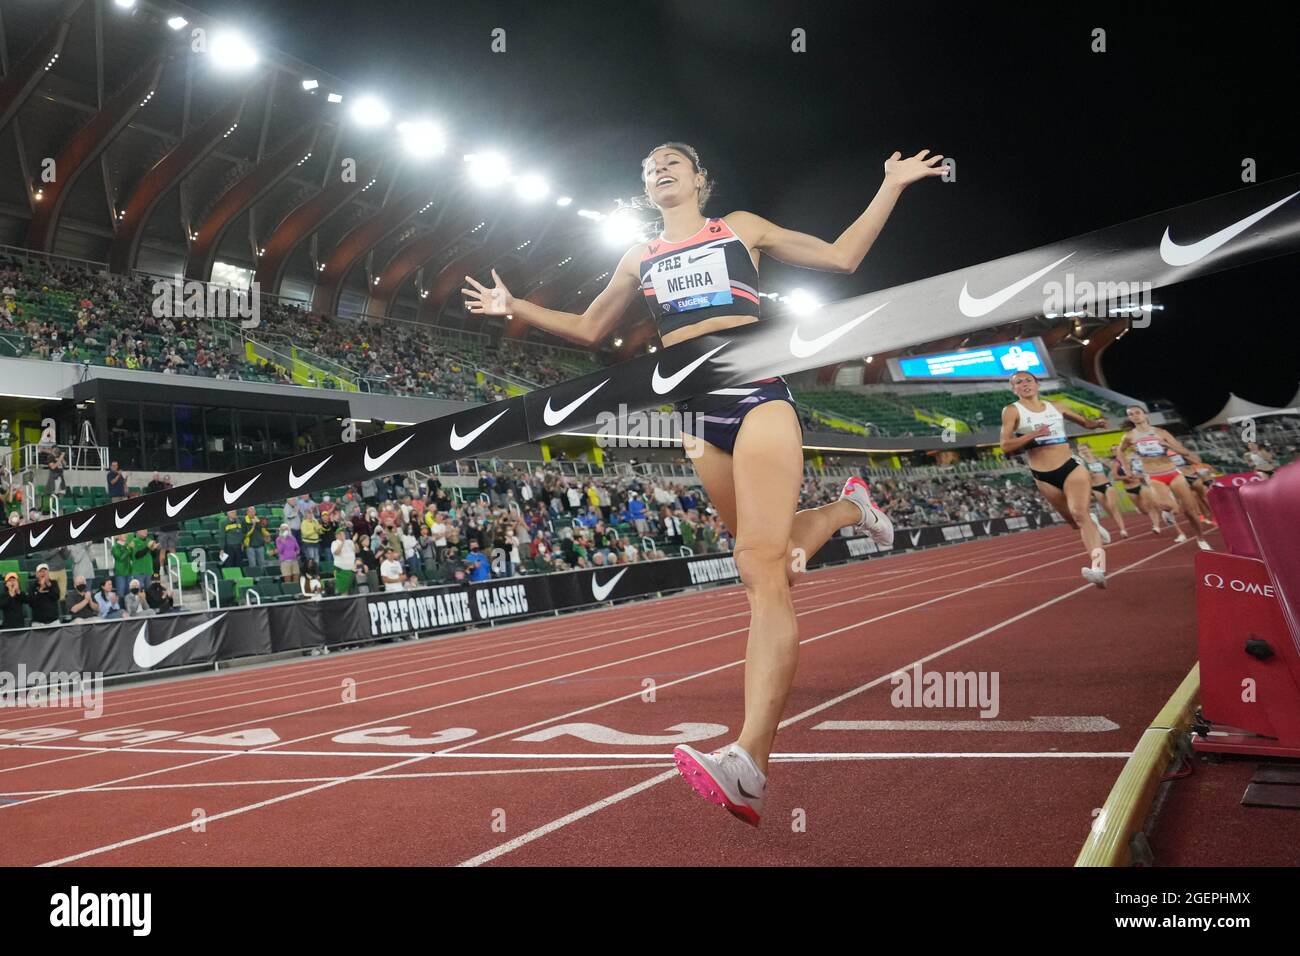 Rebecca Mehra (USA) celebrates after winning the North American women's 1,500m in 4:06.35 during the 46th  Prefontaine Classic, Friday, Aug. 20, 2021, Stock Photo